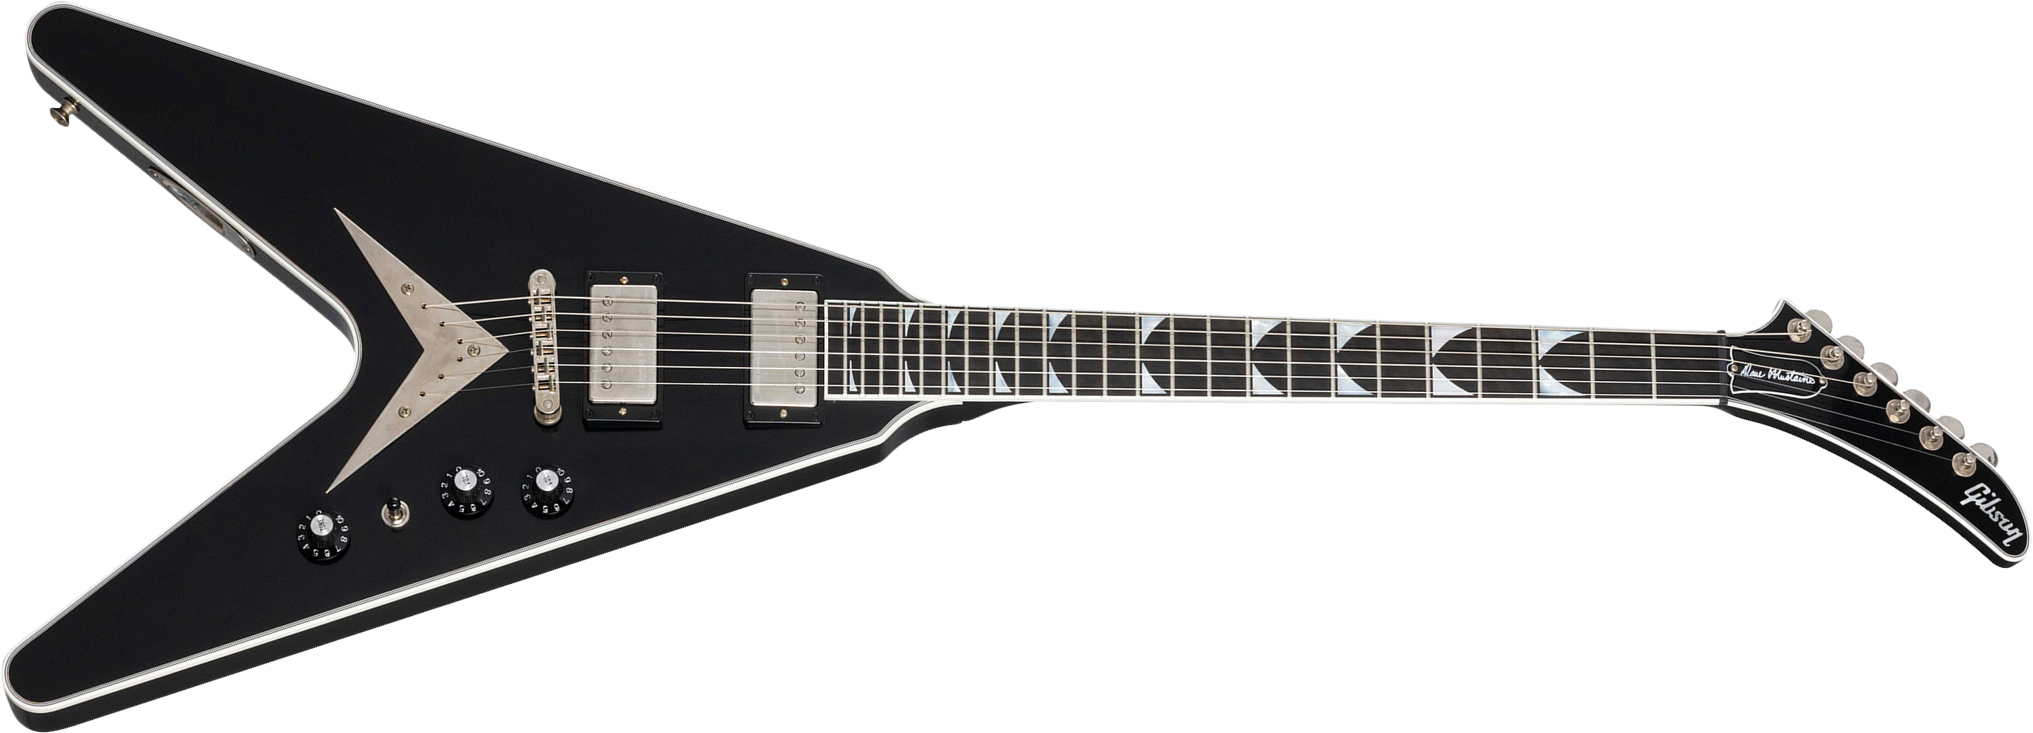 Gibson Custom Shop Dave Mustaine Flying V Exp Ltd Signature 2h Ht Eb - Vos Ebony - Guitarra electrica metalica - Main picture